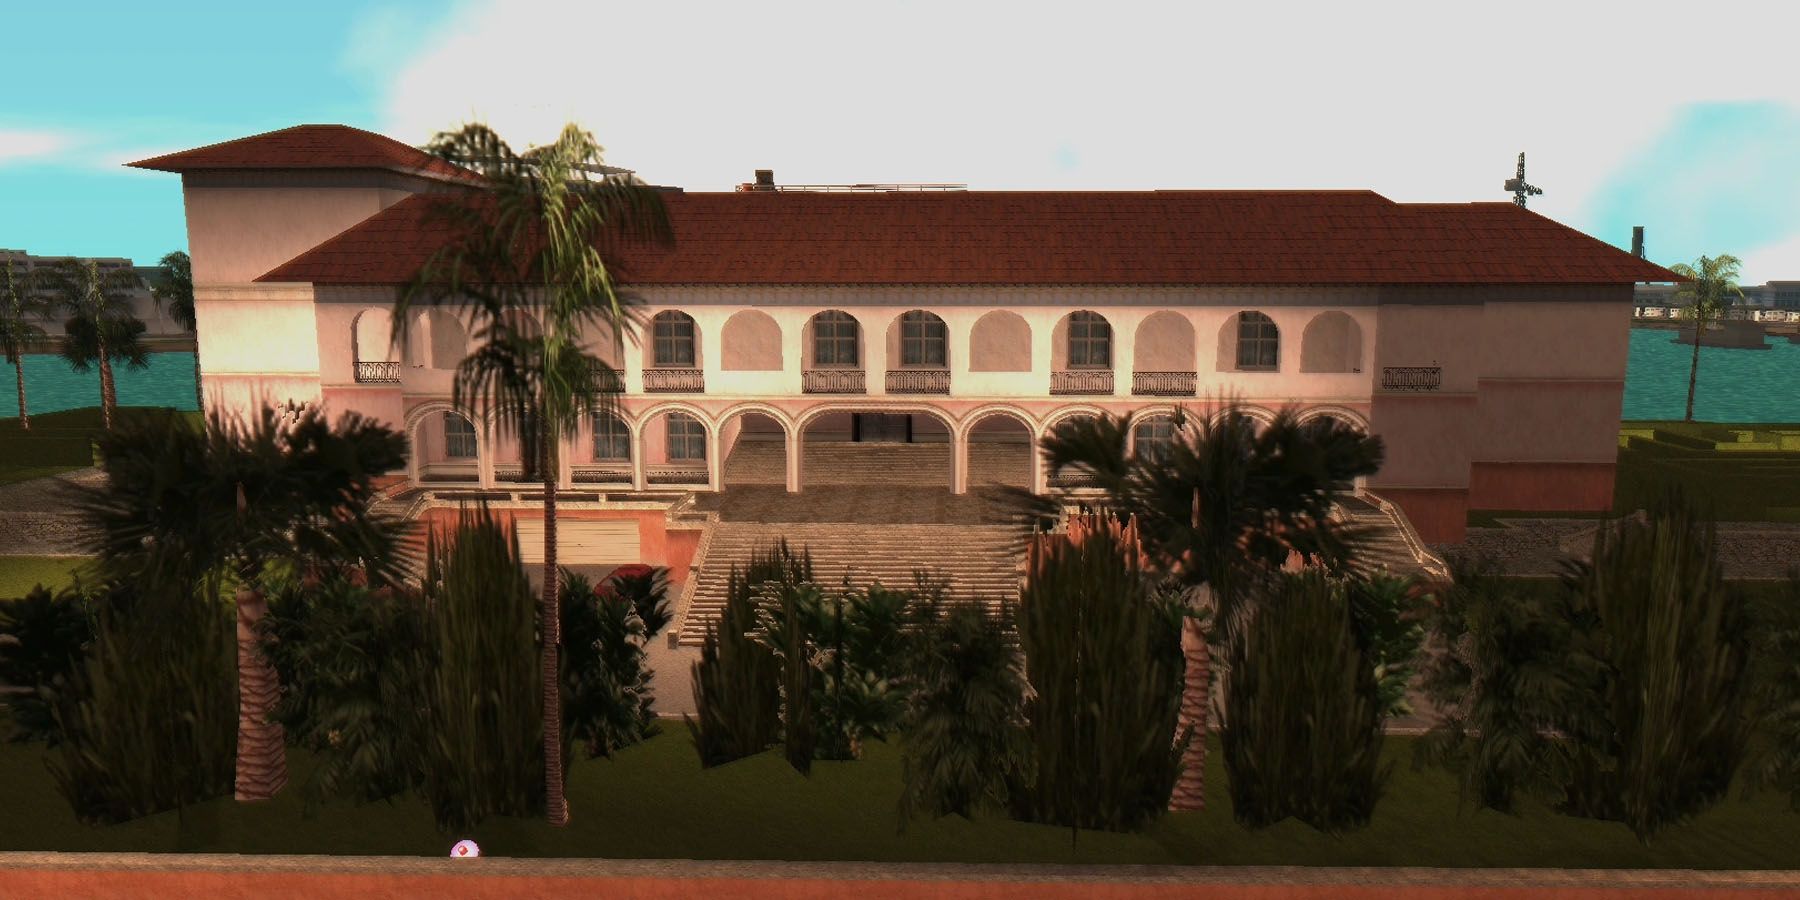 A screenshot of Tommy Vercetti's mansion from Grand Theft Auto: Vice City.